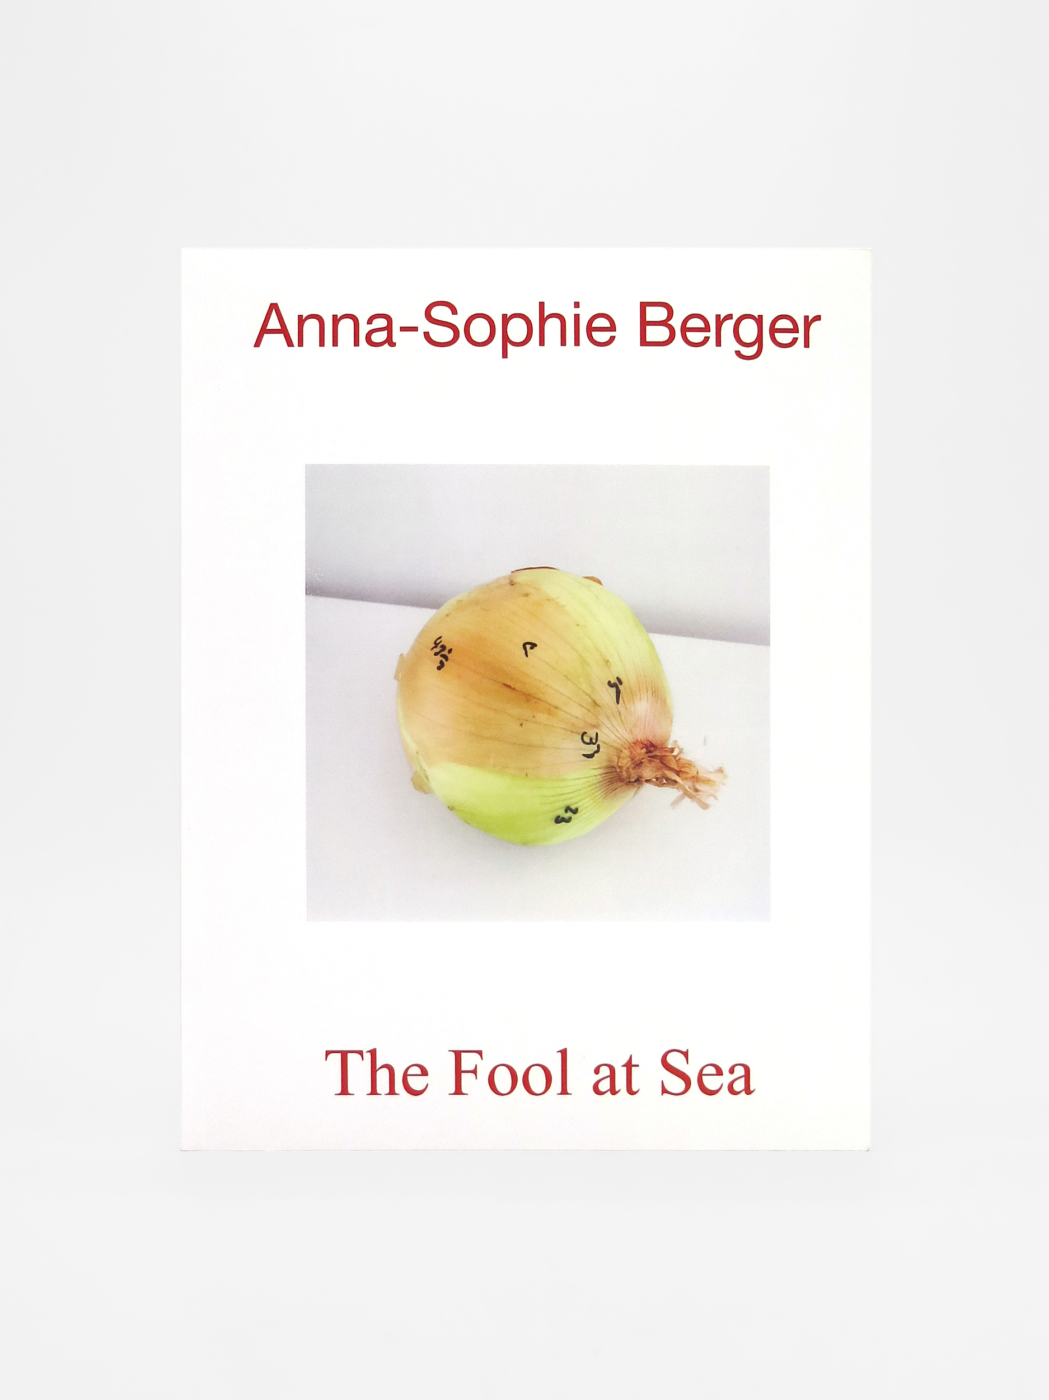 Anna-Sophie Berger, The Fool at Sea